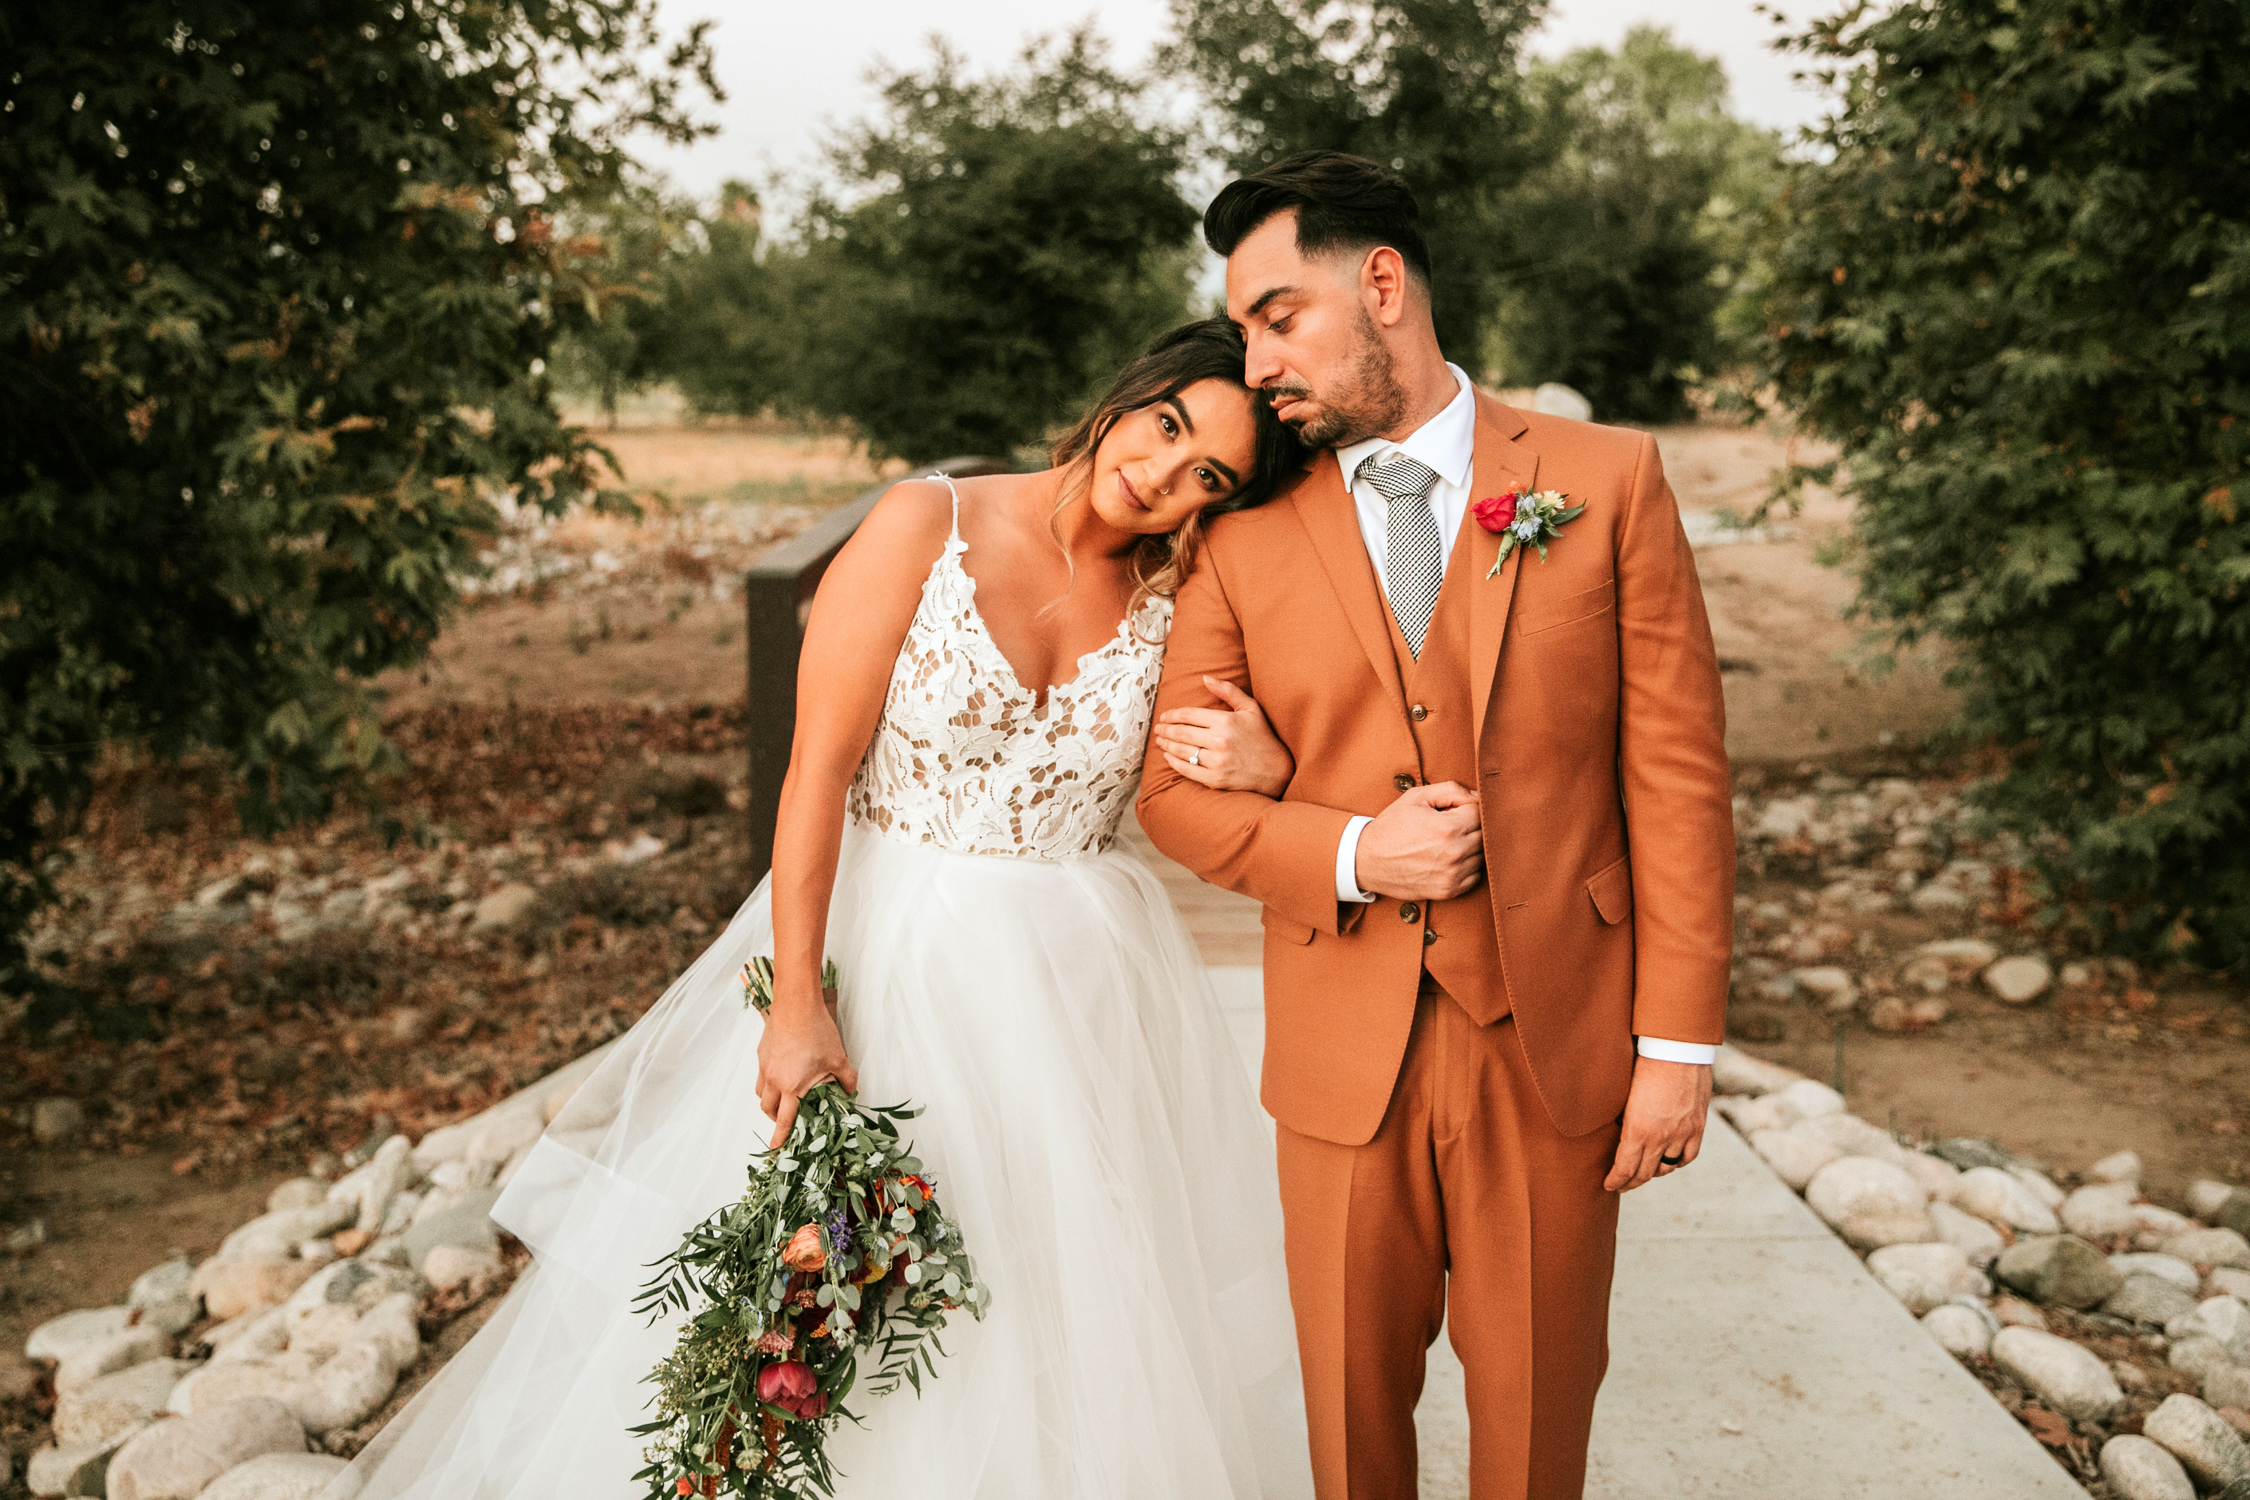 A Styled Shoot With Modern Vibes & Bright Colors